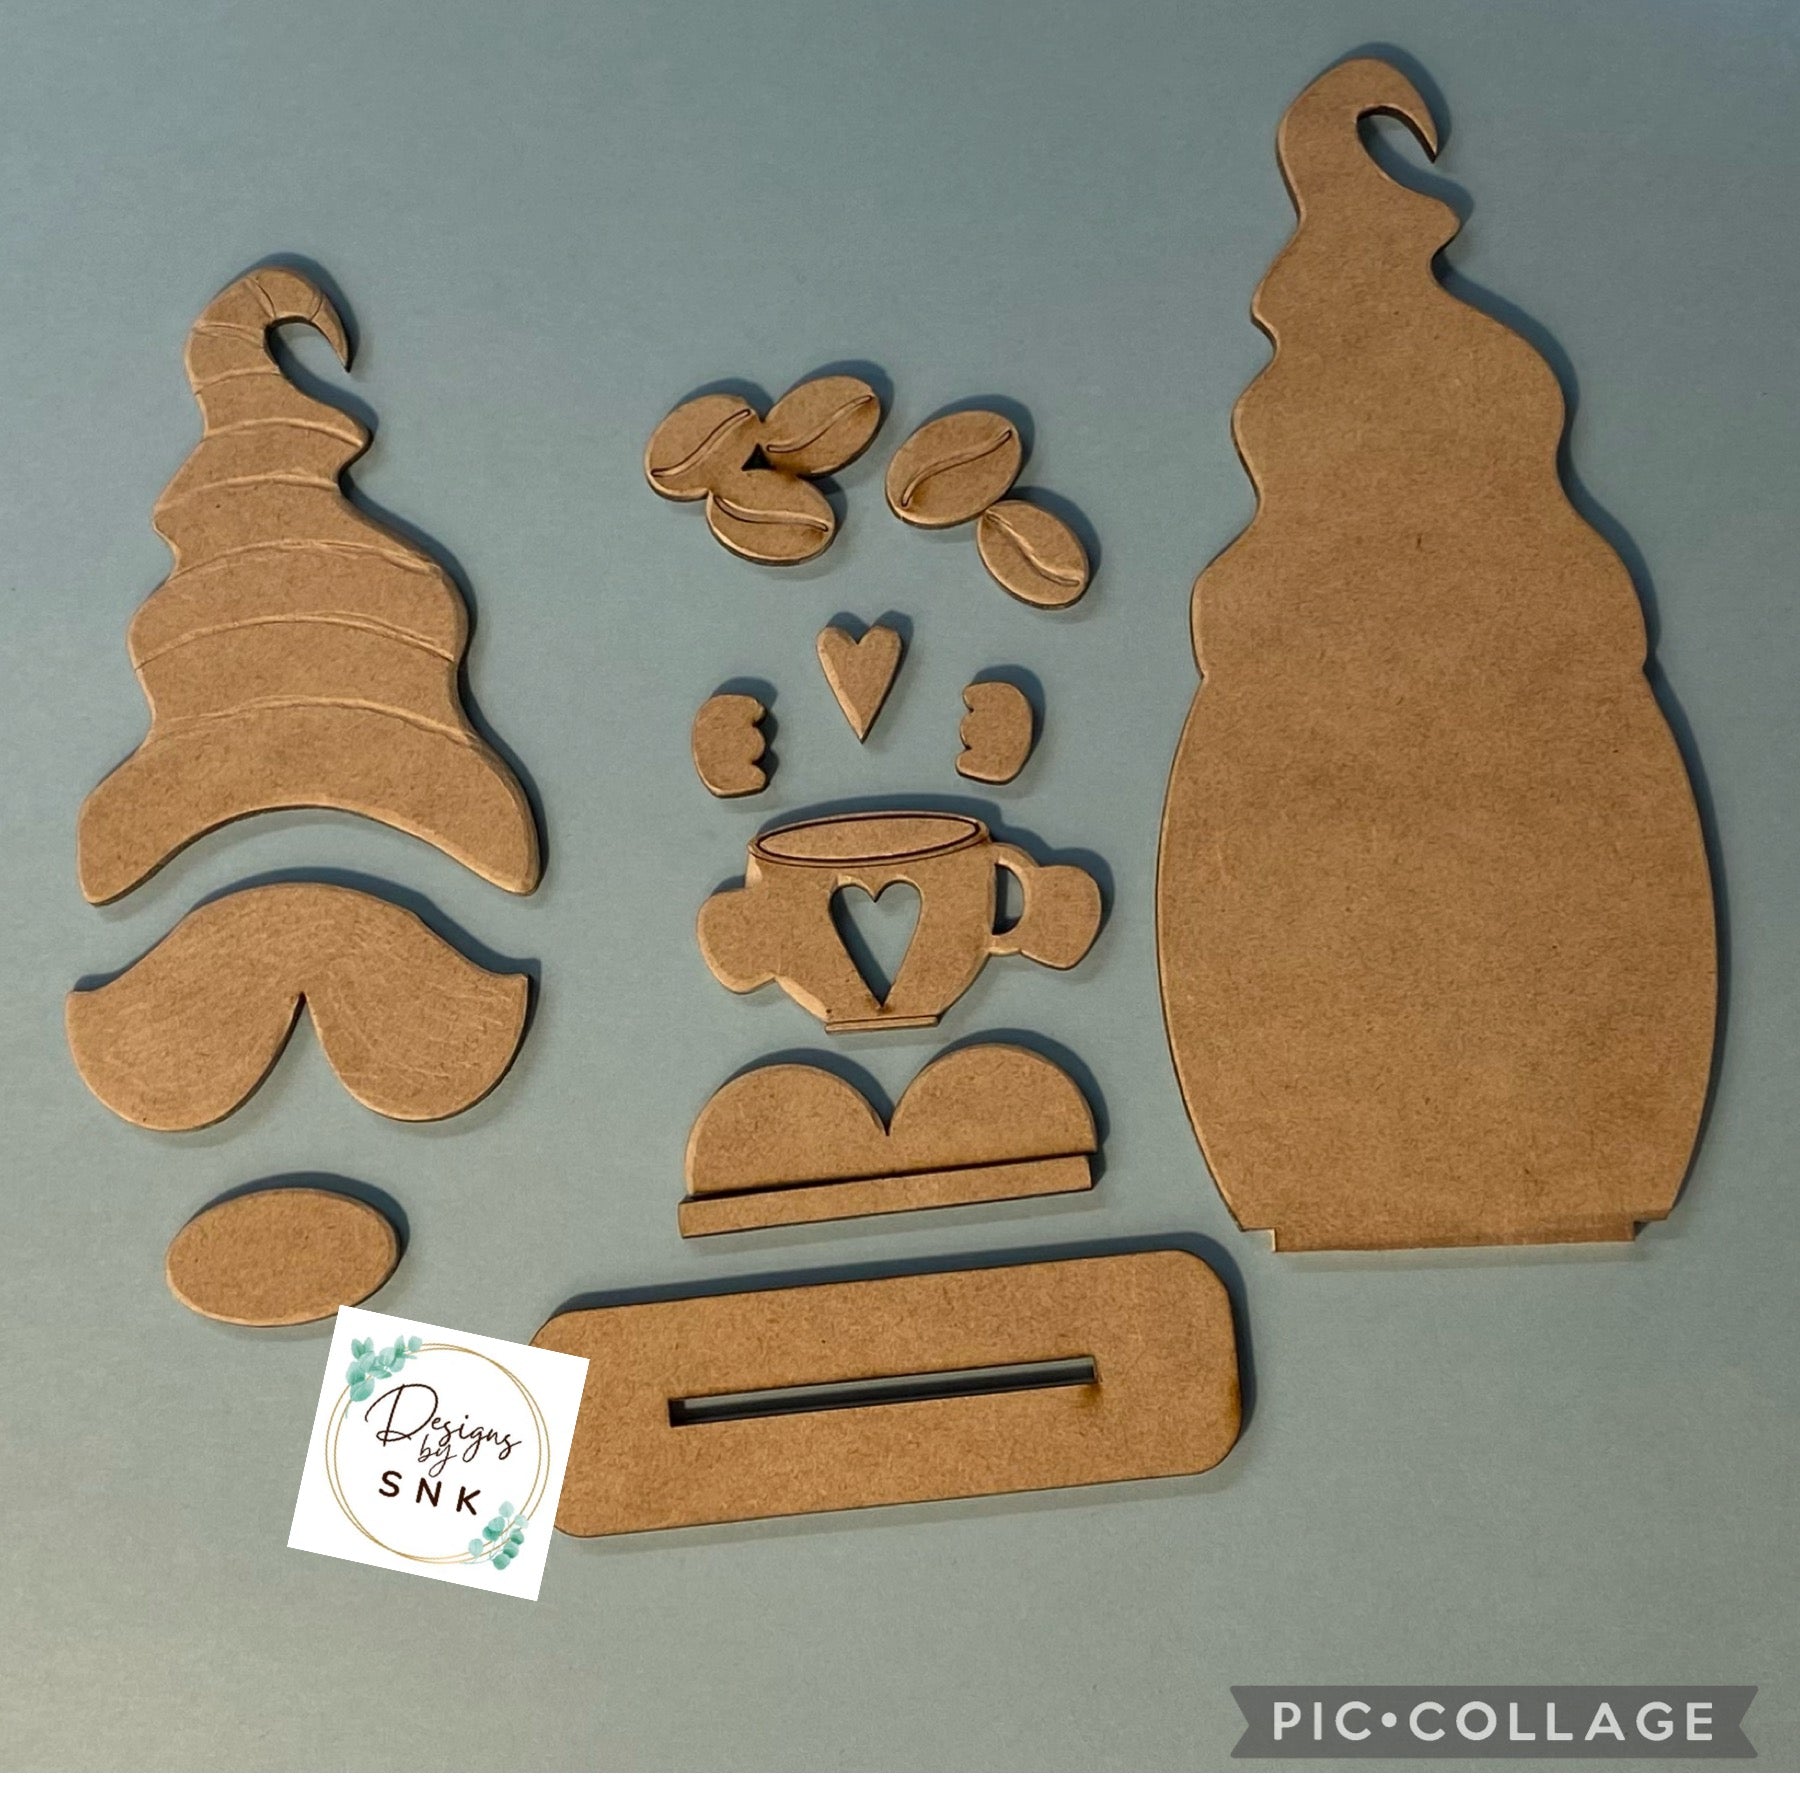 Coffee Gnome | DIY Kit | Finished or Unfinished - Designs by SNK